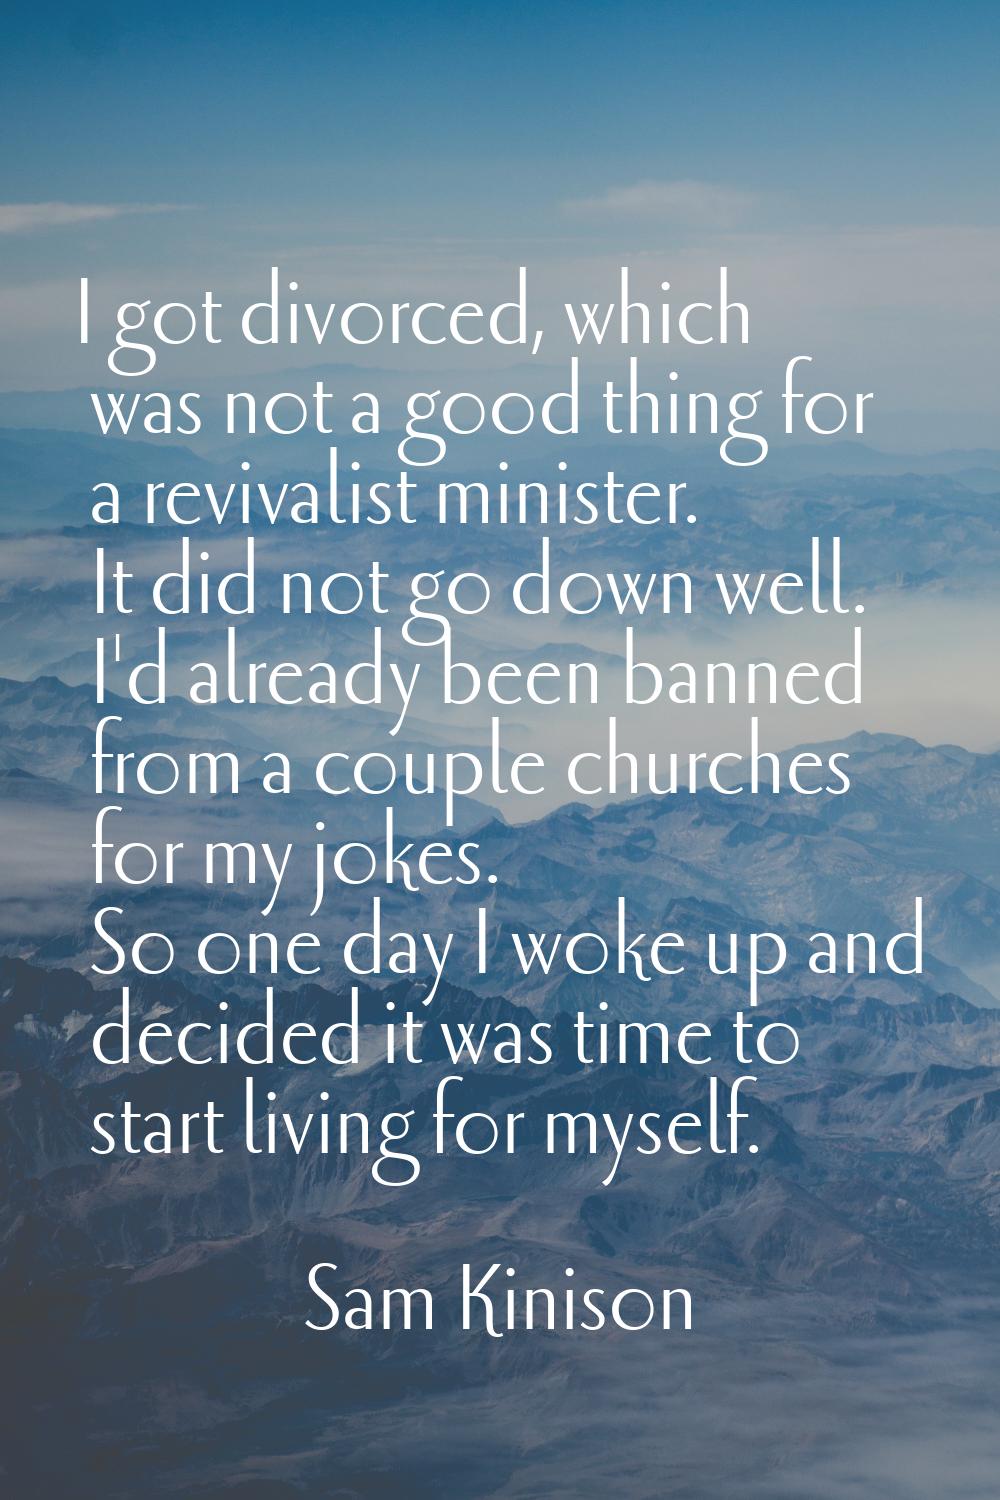 I got divorced, which was not a good thing for a revivalist minister. It did not go down well. I'd 